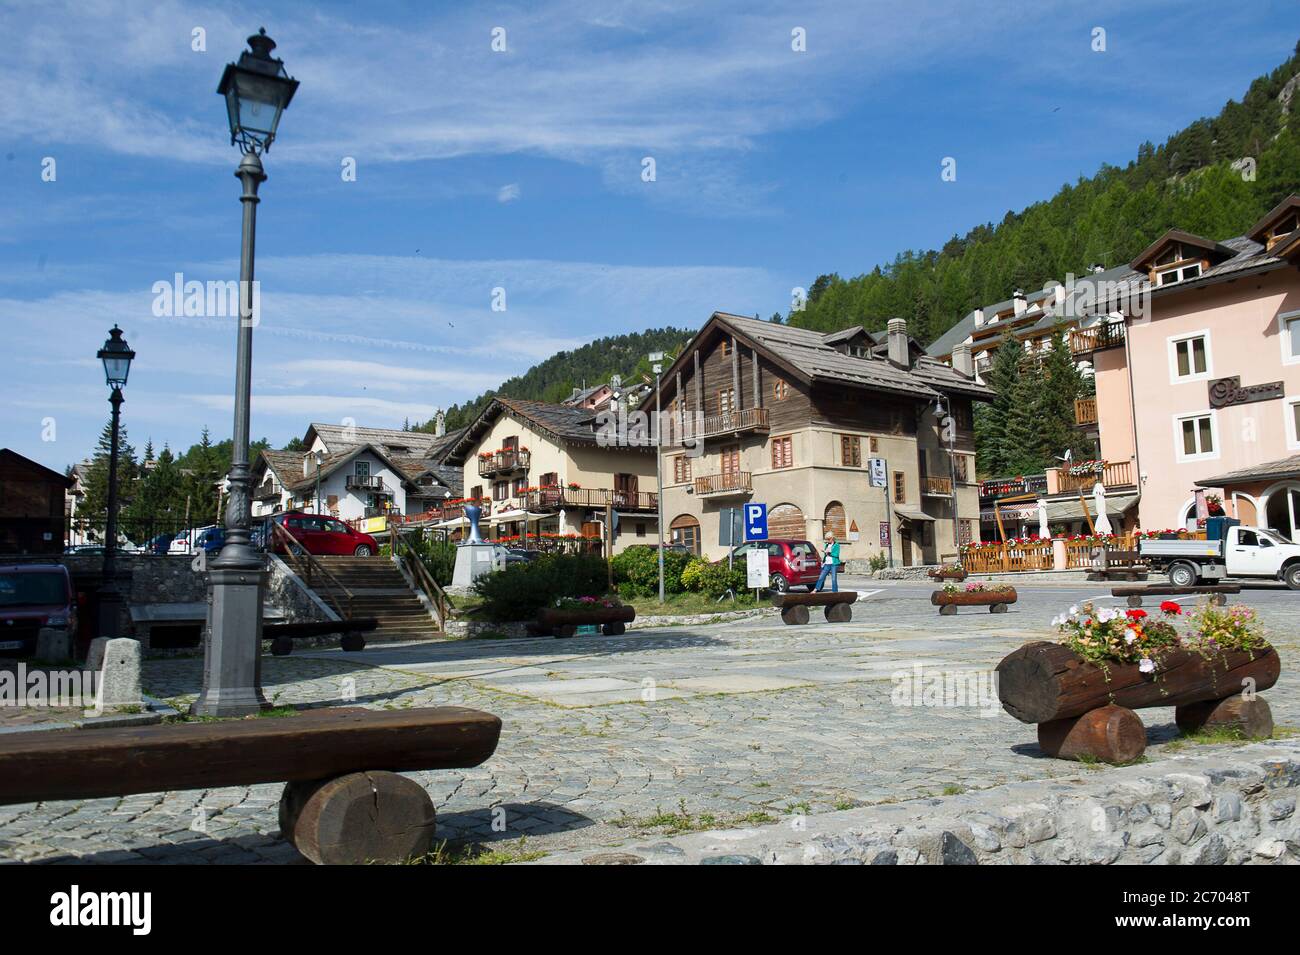 Europe, Italy, Piedmont, Valle Susa, village view, claviere, italy, turin province, piedmont, italy, village, mountain, houses, landscape, horizontal, summer Stock Photo